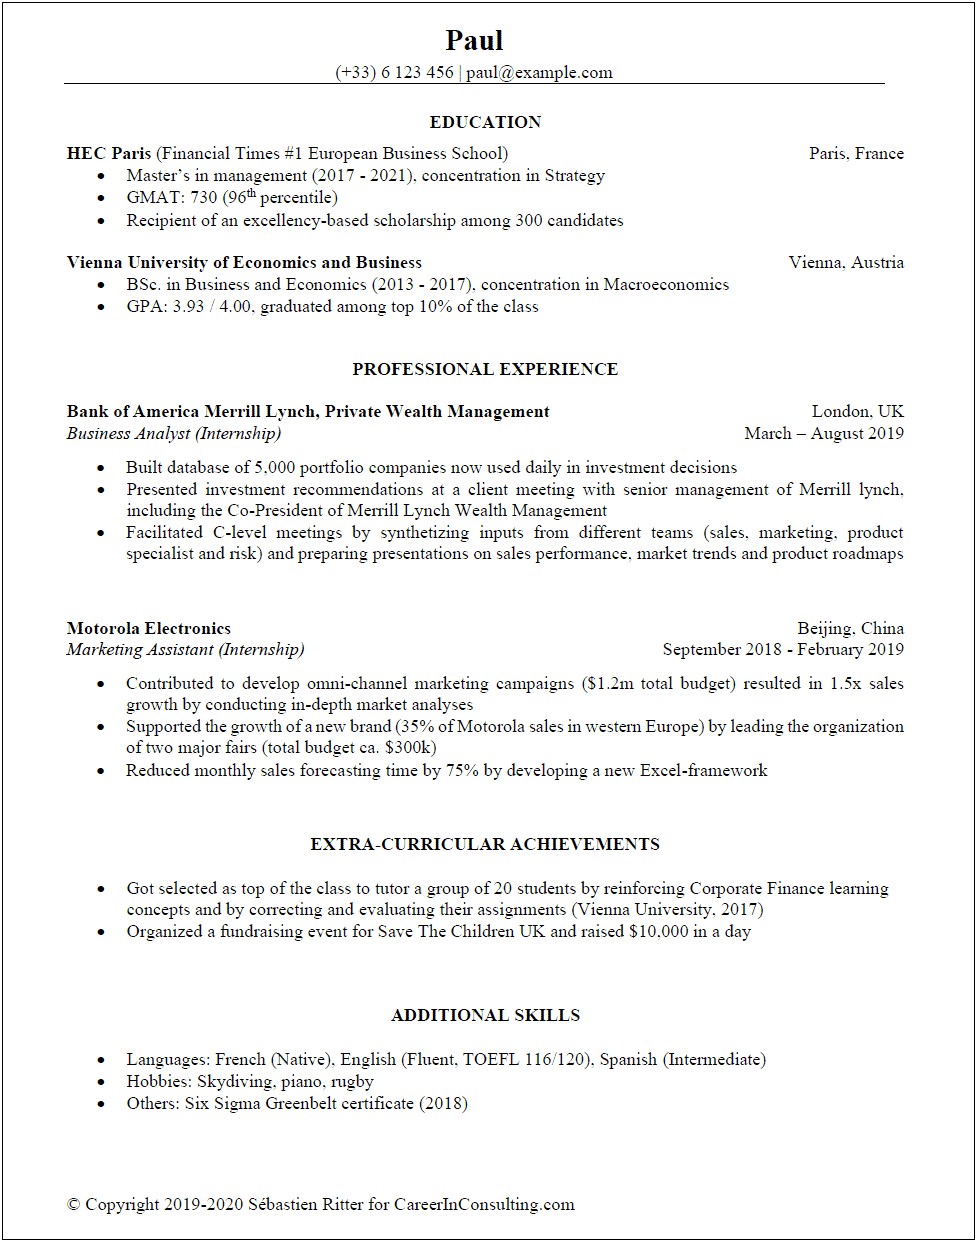 Sample Learning And Development Consultant Resume